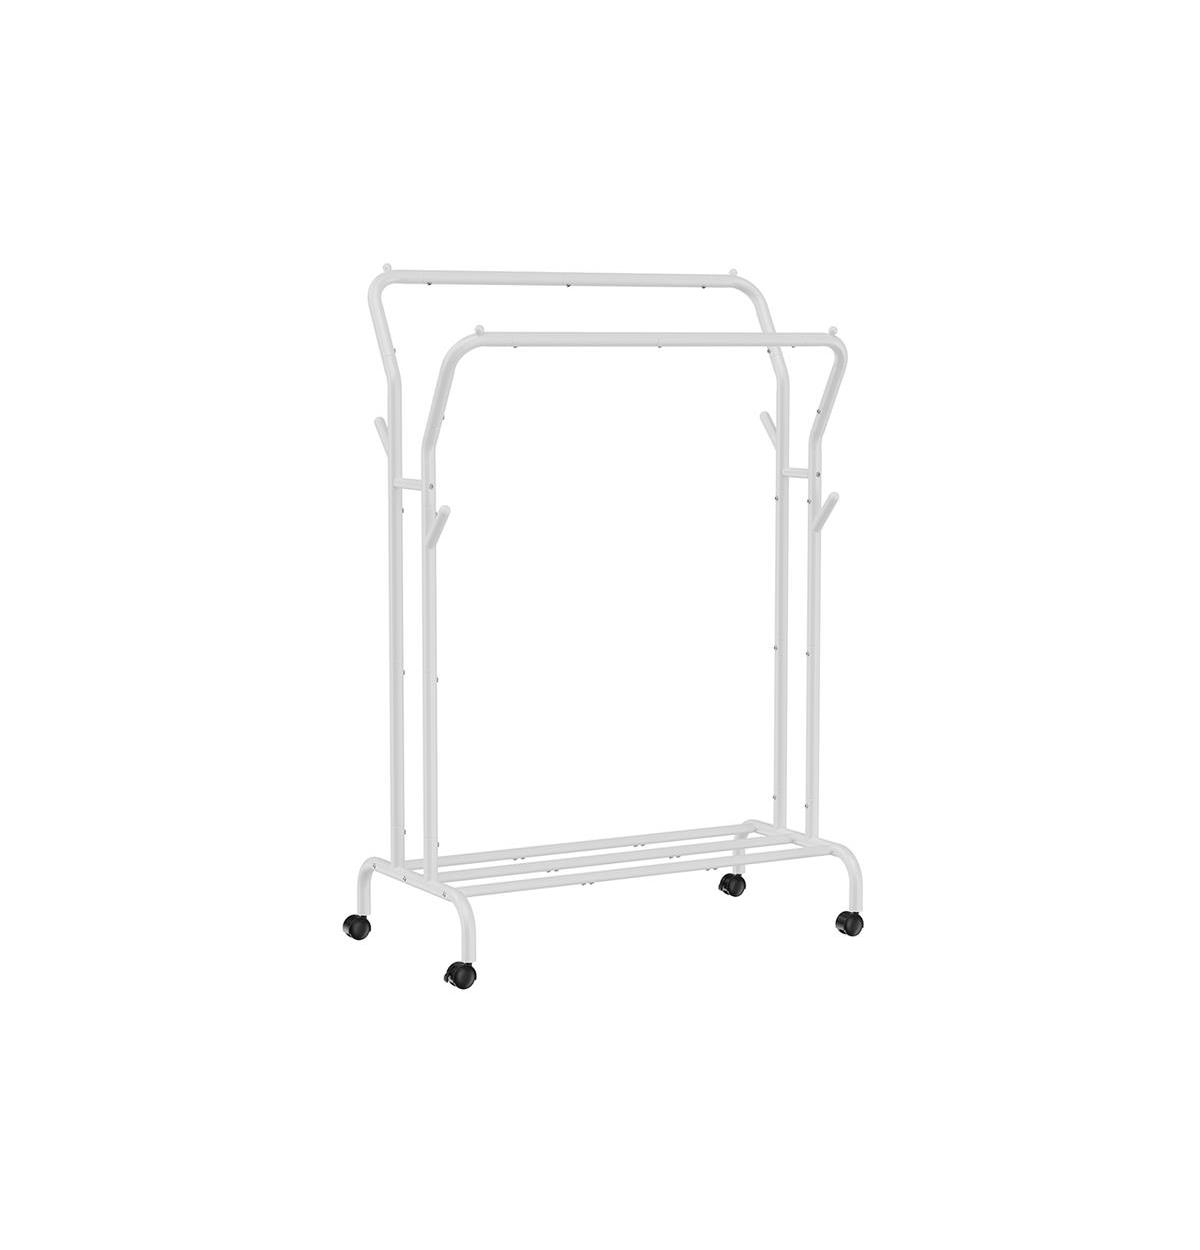 Clothes Rack, Double-rod Clothing Rack With Wheels, Heavy-duty Metal Frame, Garment Rack - White